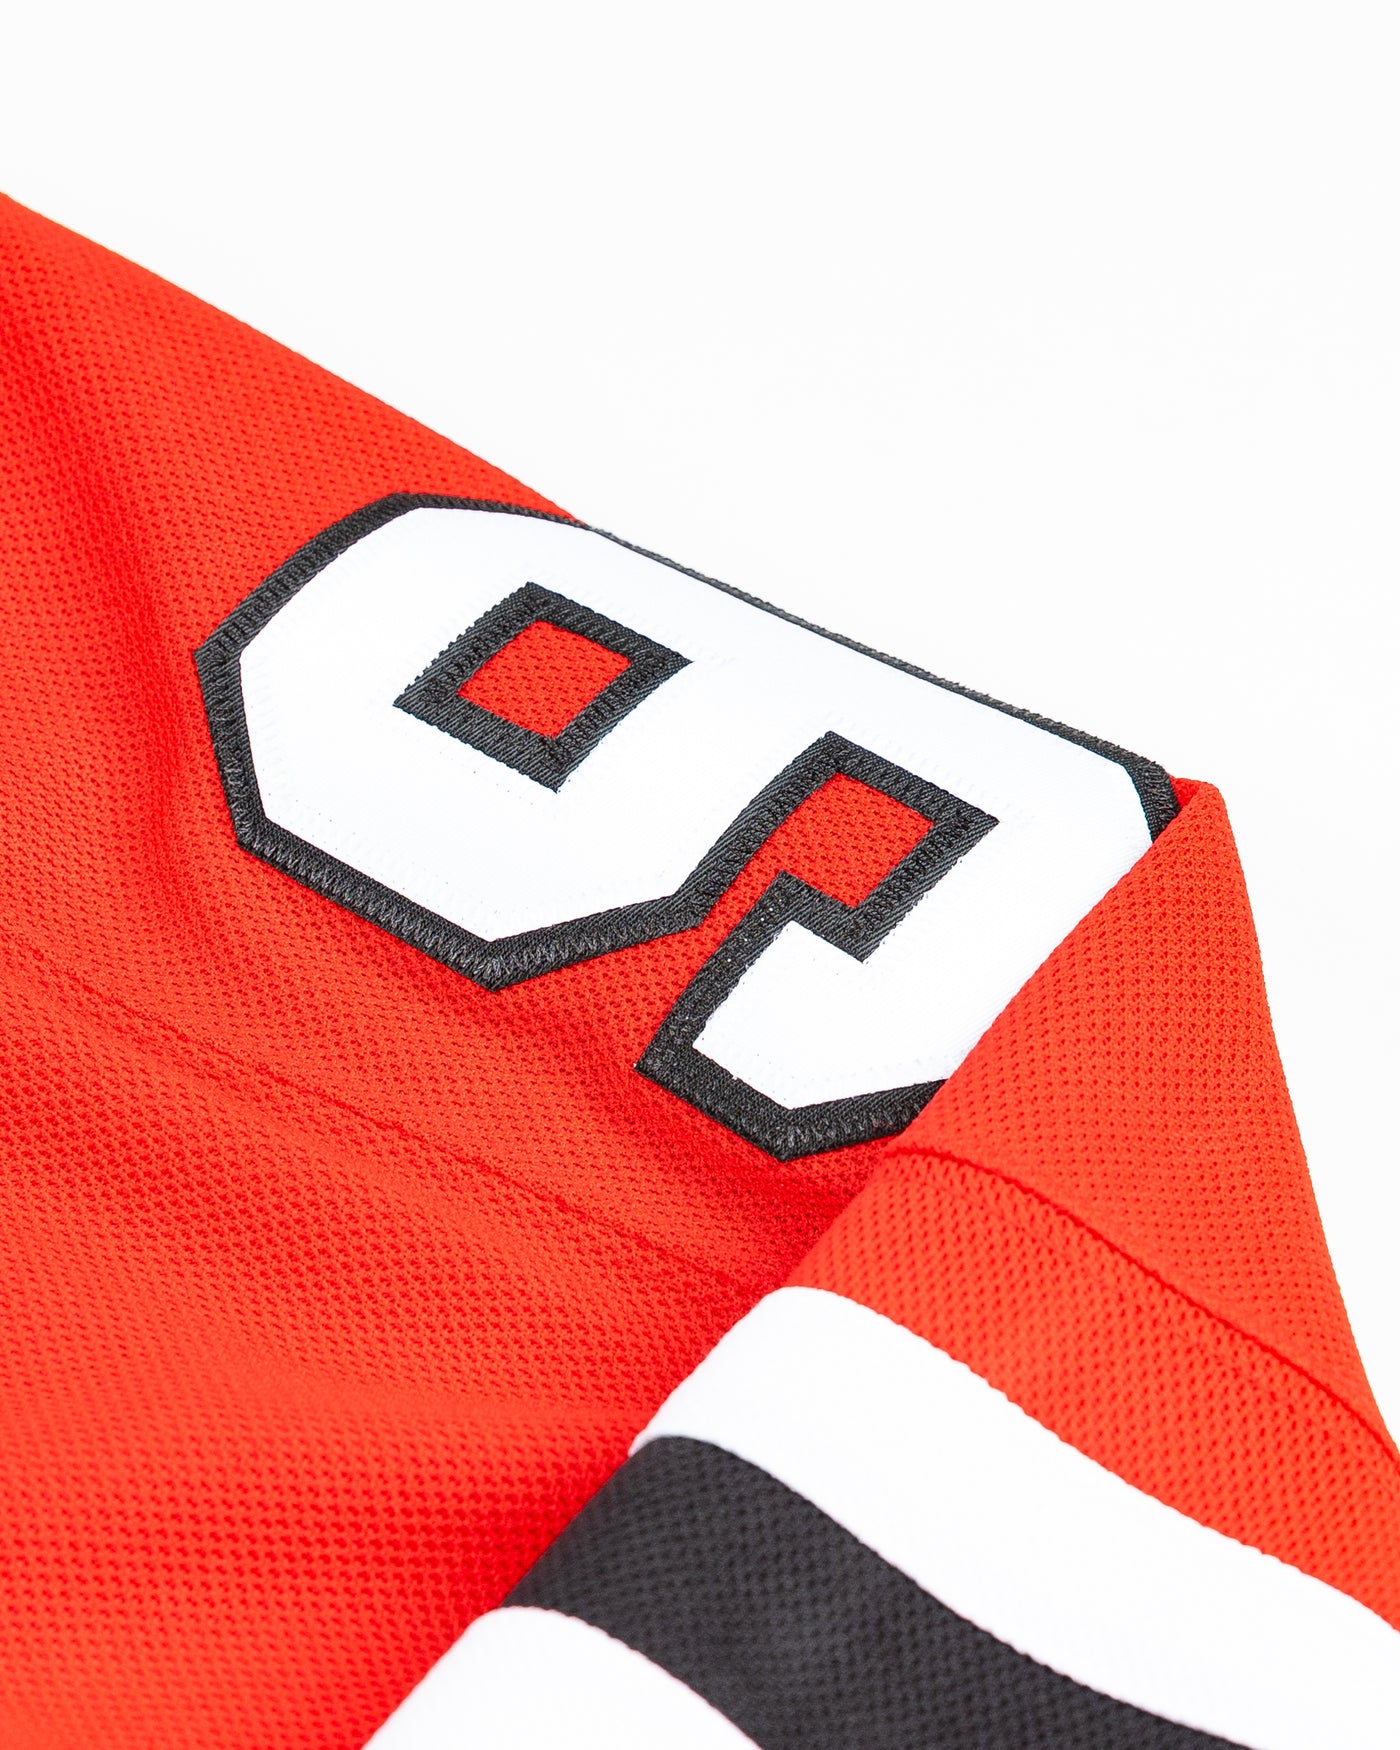 adidas red home Chicago Blackhawks hockey jersey with Connor Bedard name and number - arm detail lay flat